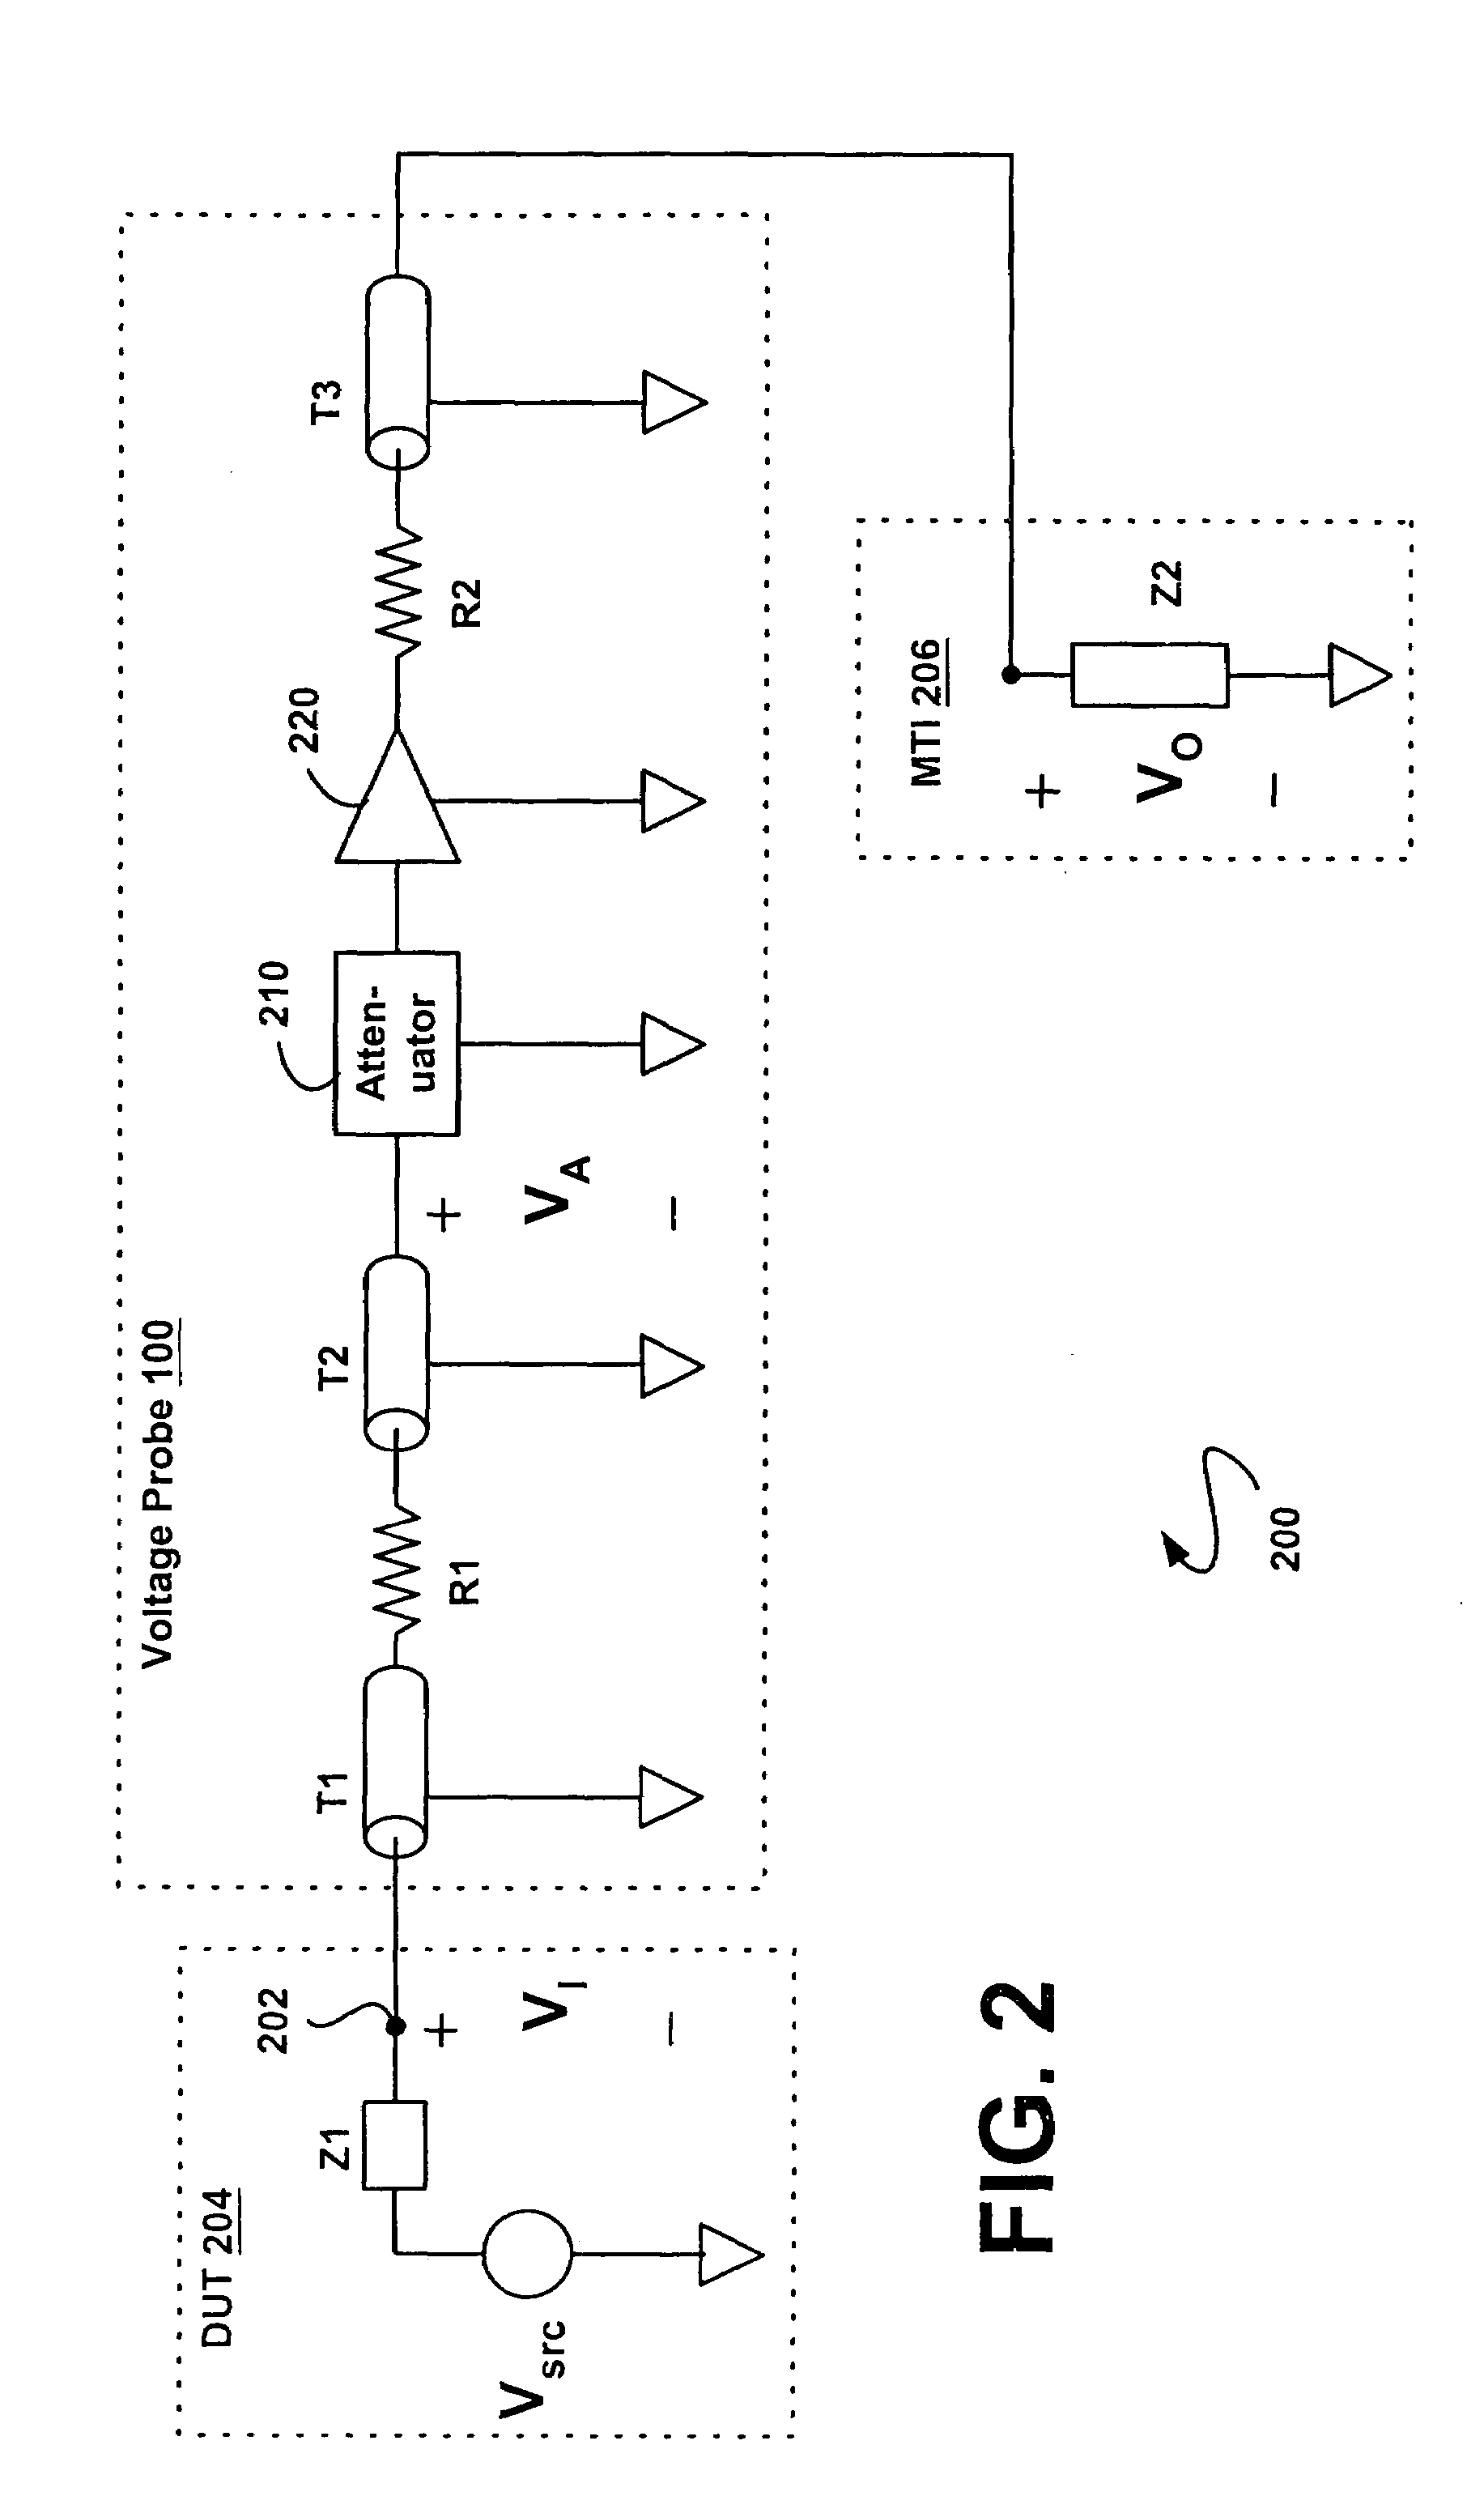 Voltage probe systems having improved bandwidth capability